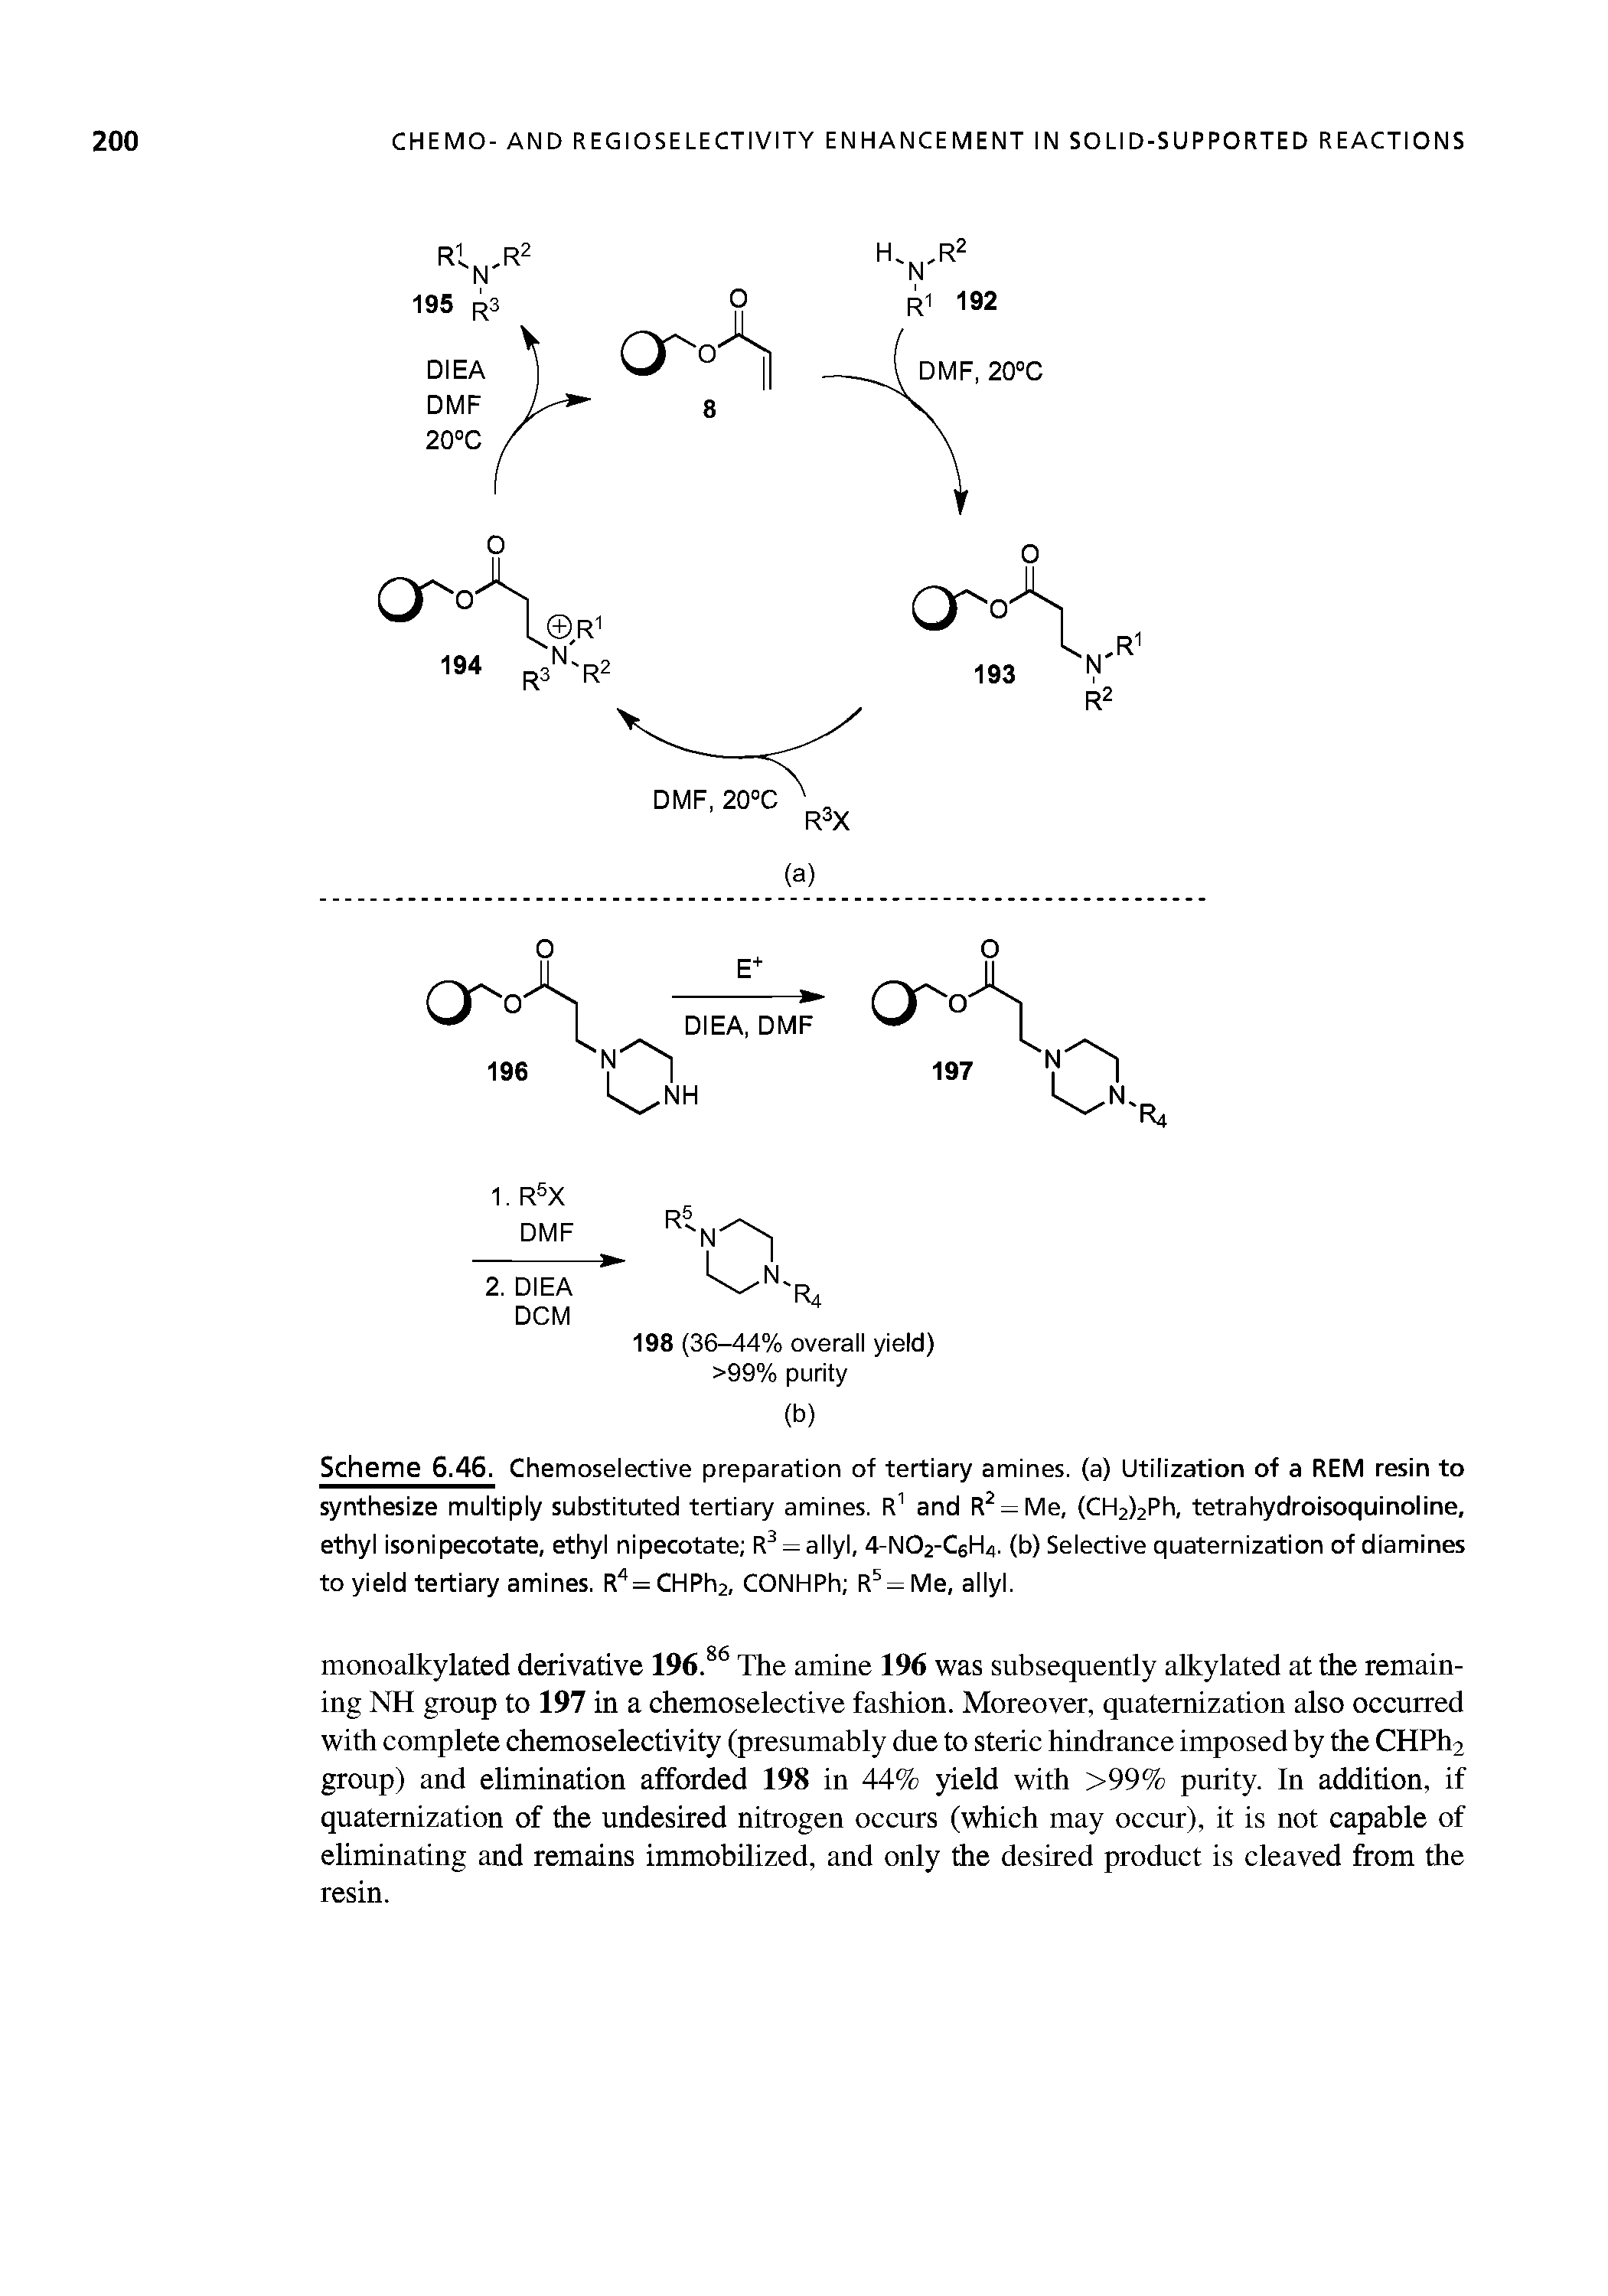 Scheme 6.46. Chemoselective preparation of tertiary amines, (a) Utilization of a REM resin to synthesize multiply substituted tertiary amines. R and R = Me, (CH2)2Ph, tetrahydroisoquinoline, ethyl Isonipecotate, ethyl nipecotate R = allyl, 4-NO2-C6H4. (b) Selective quaternizatlon of diamines to yield tertiary amines. R = CHPh2, CONHPh R = Me, allyl.